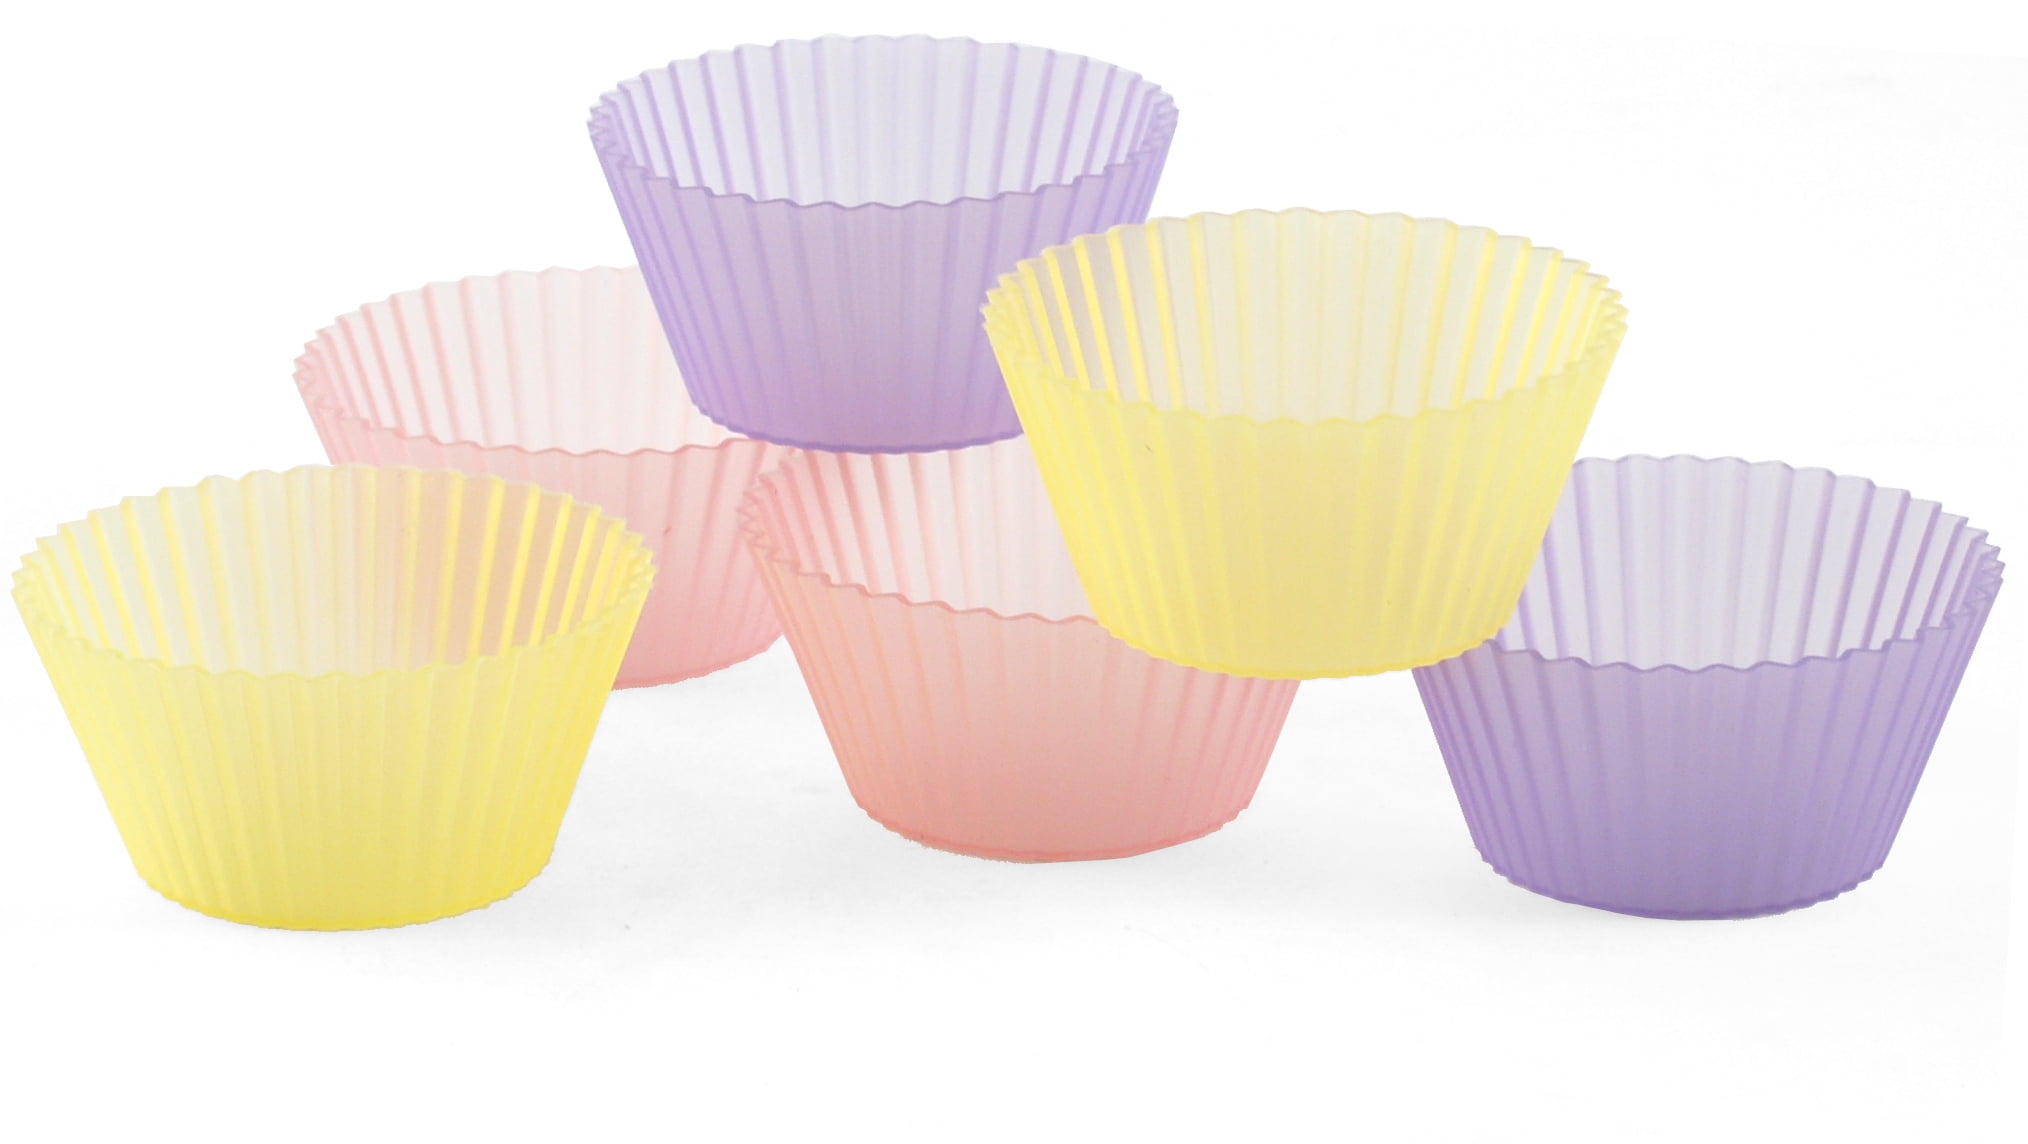 HIC REGENCY SILI SILICONE CUPCAKE MUFFIN HOLDERS CLEAR MINI SIZE BAKING set of 6 